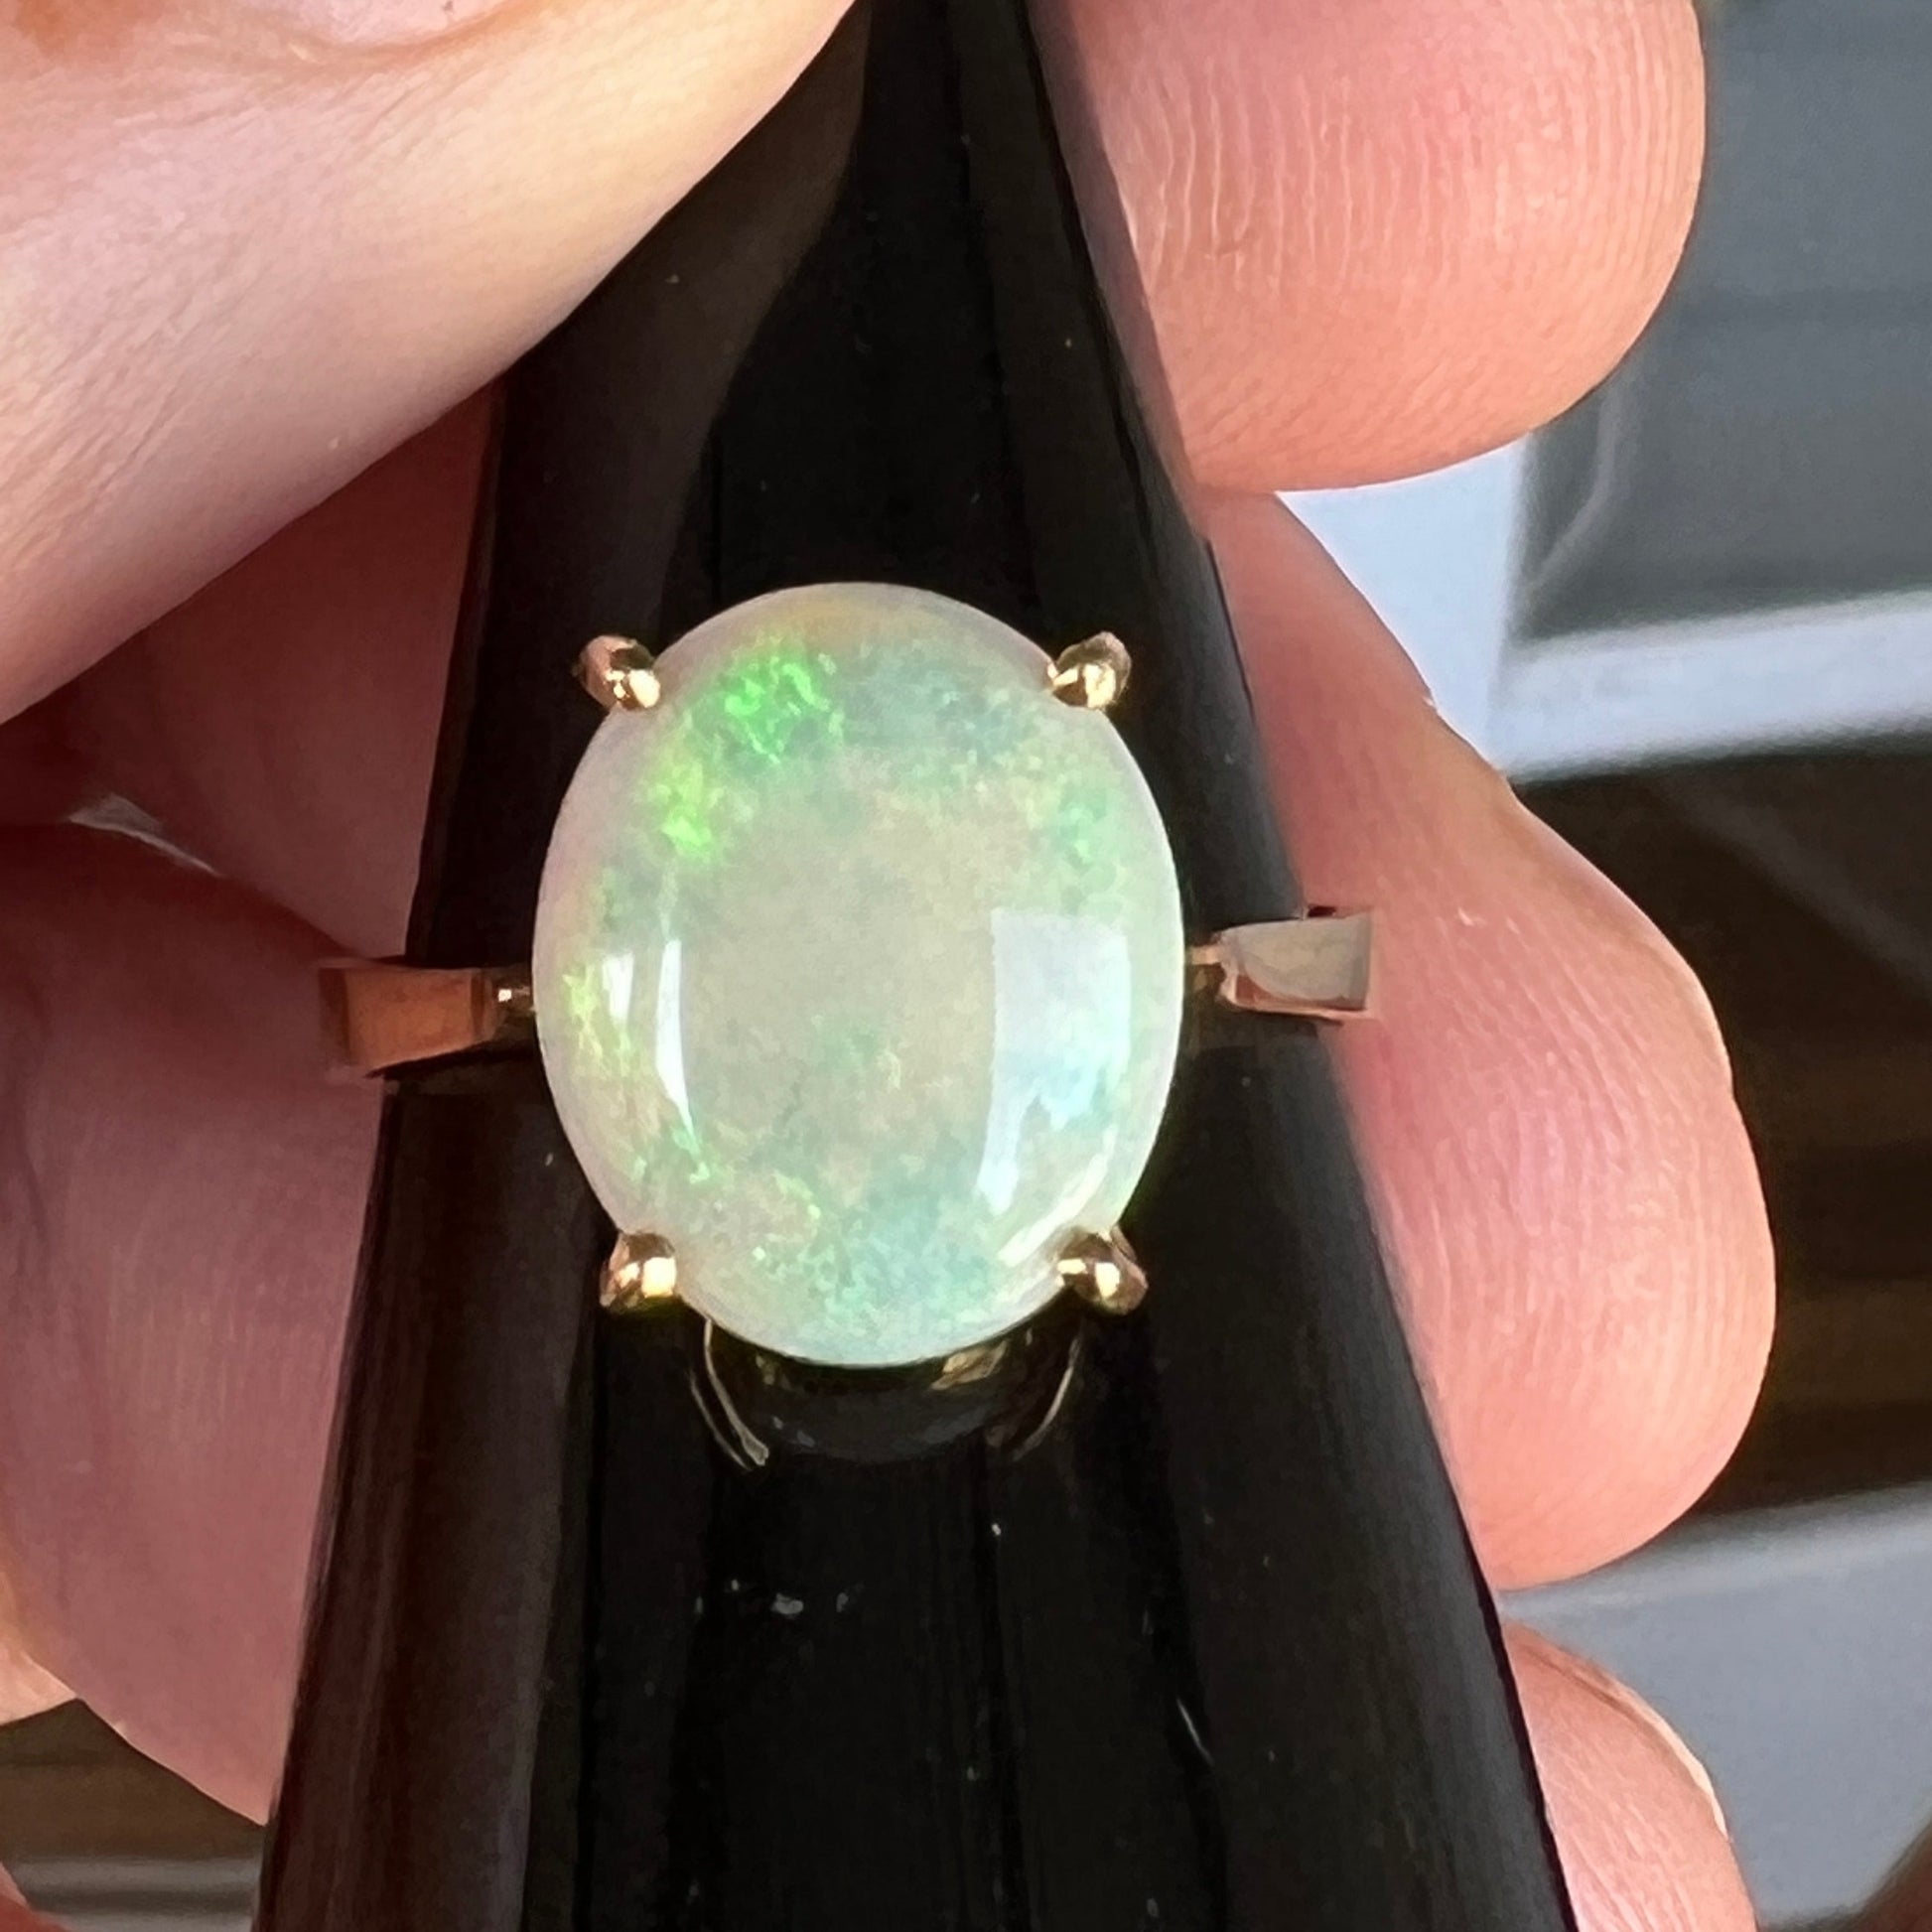 Stylish simple 14ct gold and opal ring. Great greens in this Coober Pedy crystal opal.